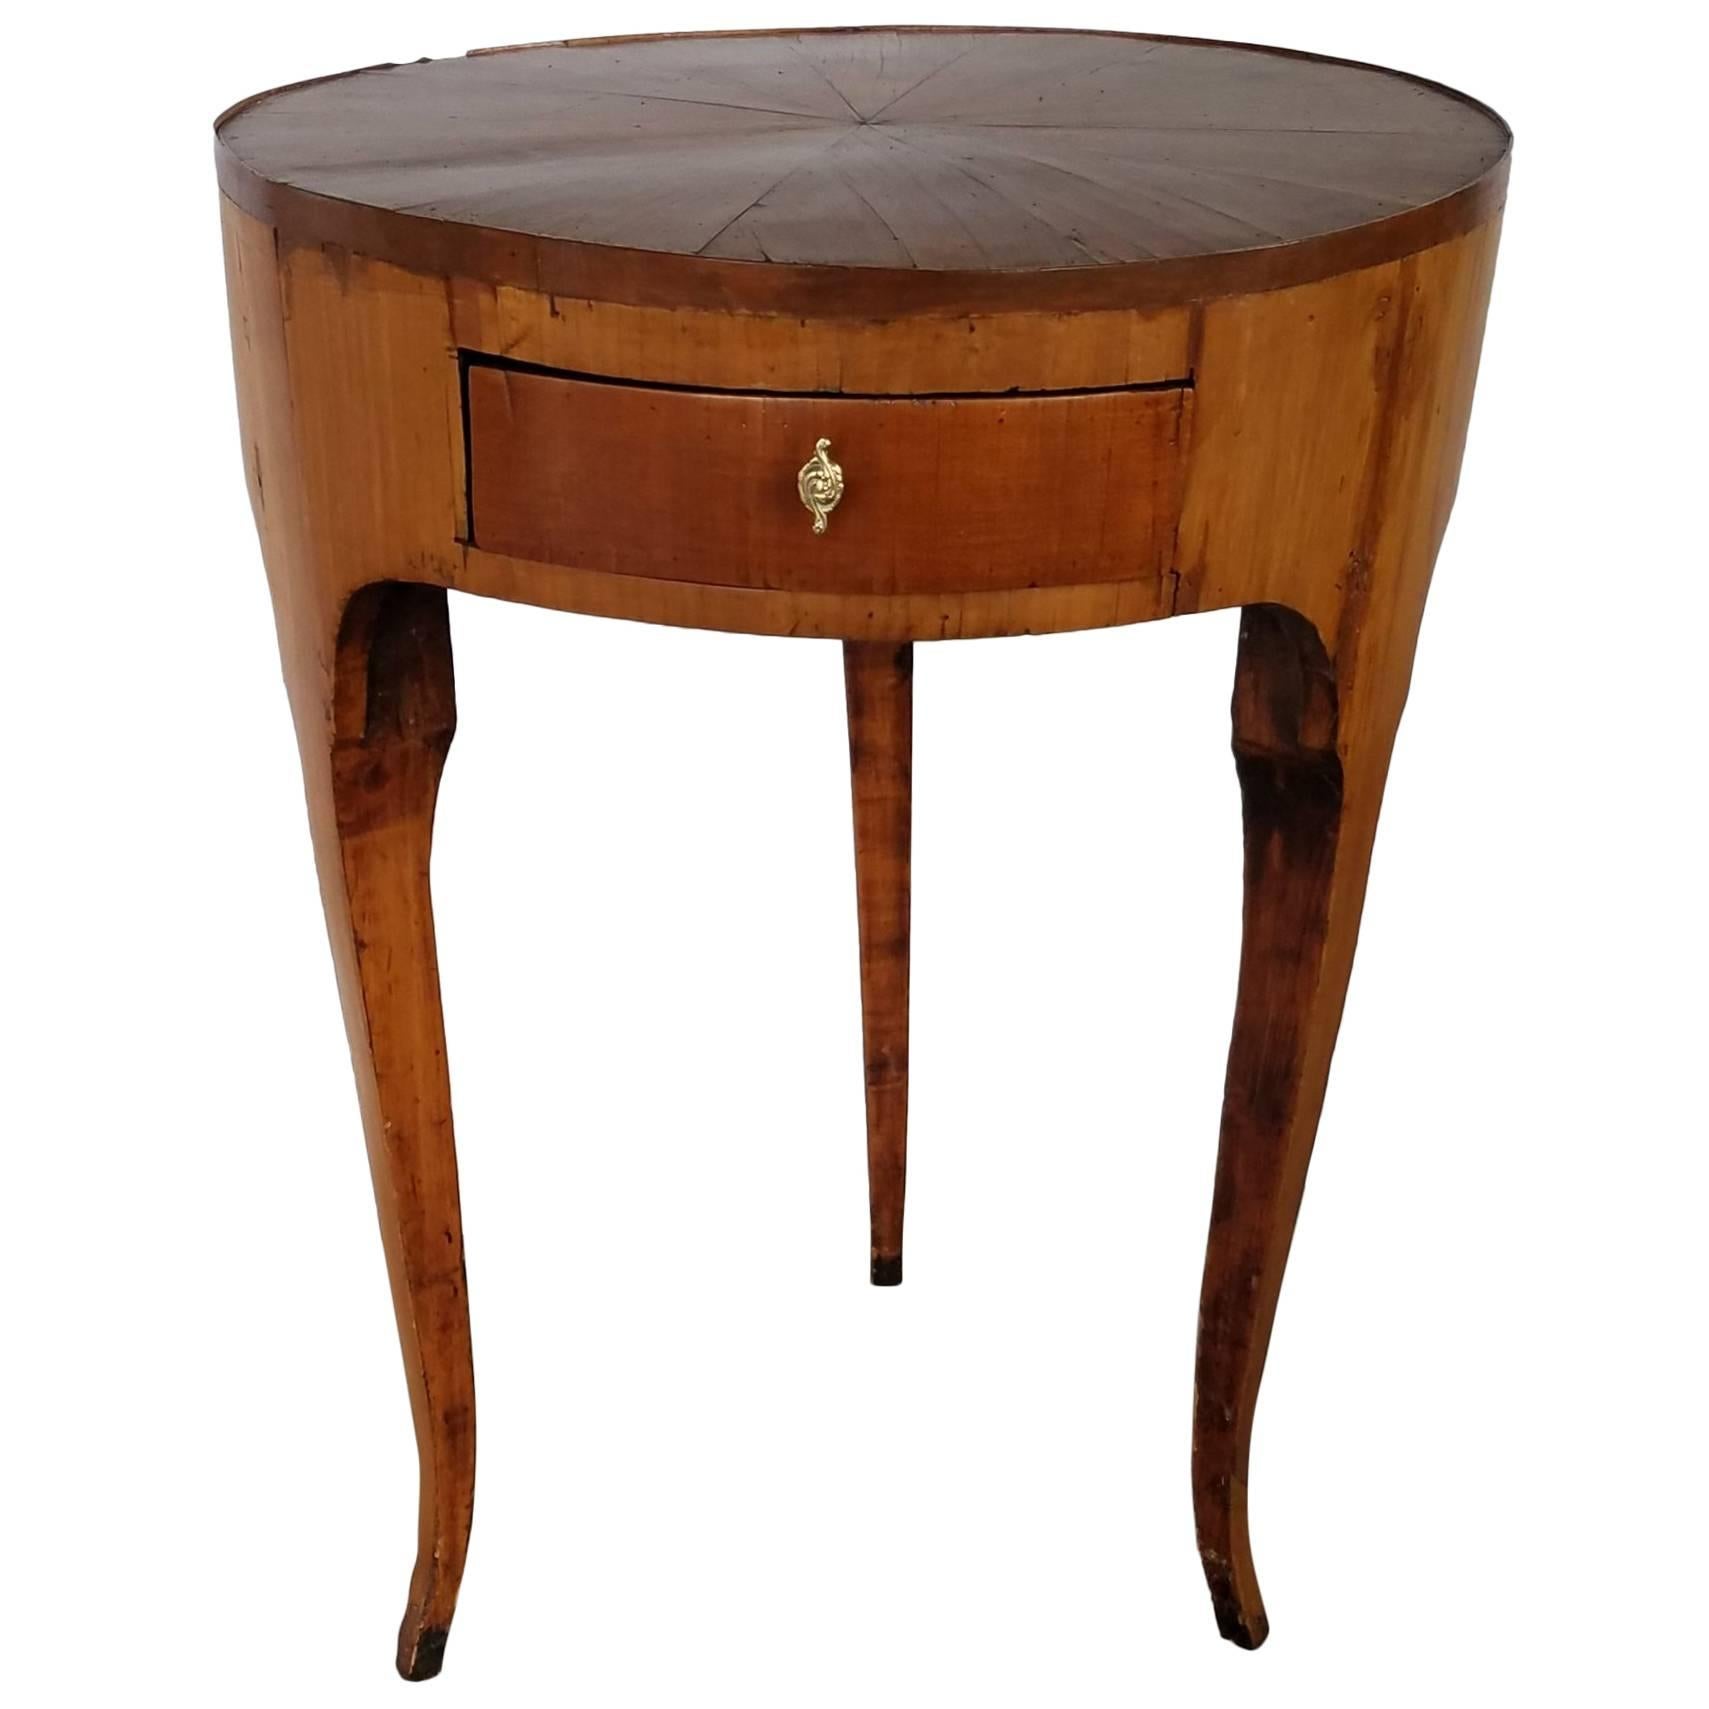 19th Century French Inlaid Wood Three-Legged Side Table For Sale